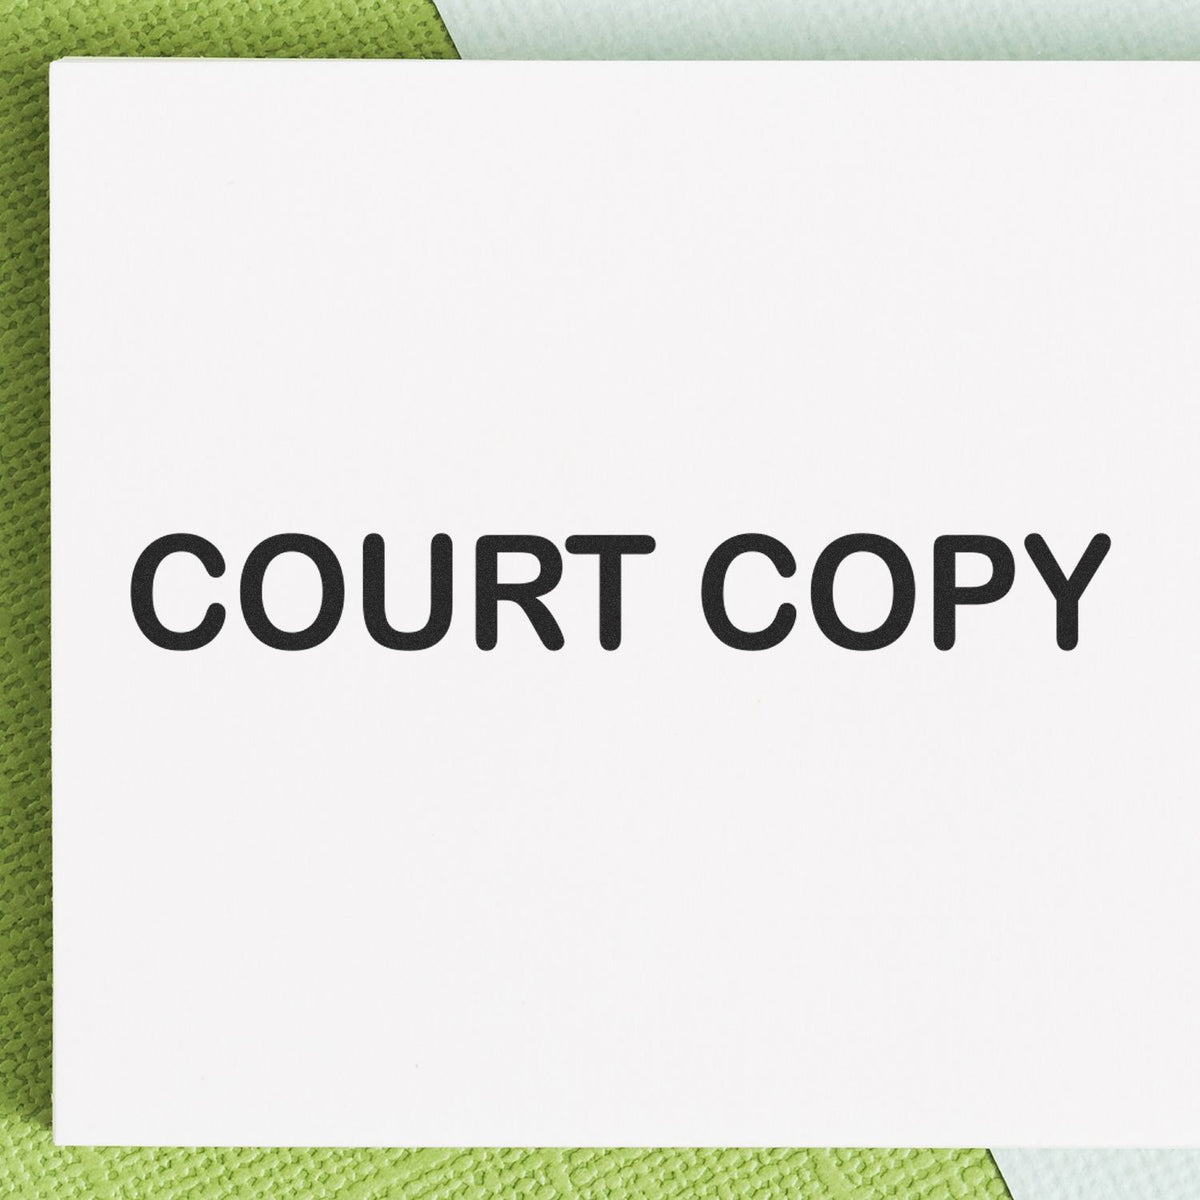 Large Court Copy Rubber Stamp Lifestyle Photo